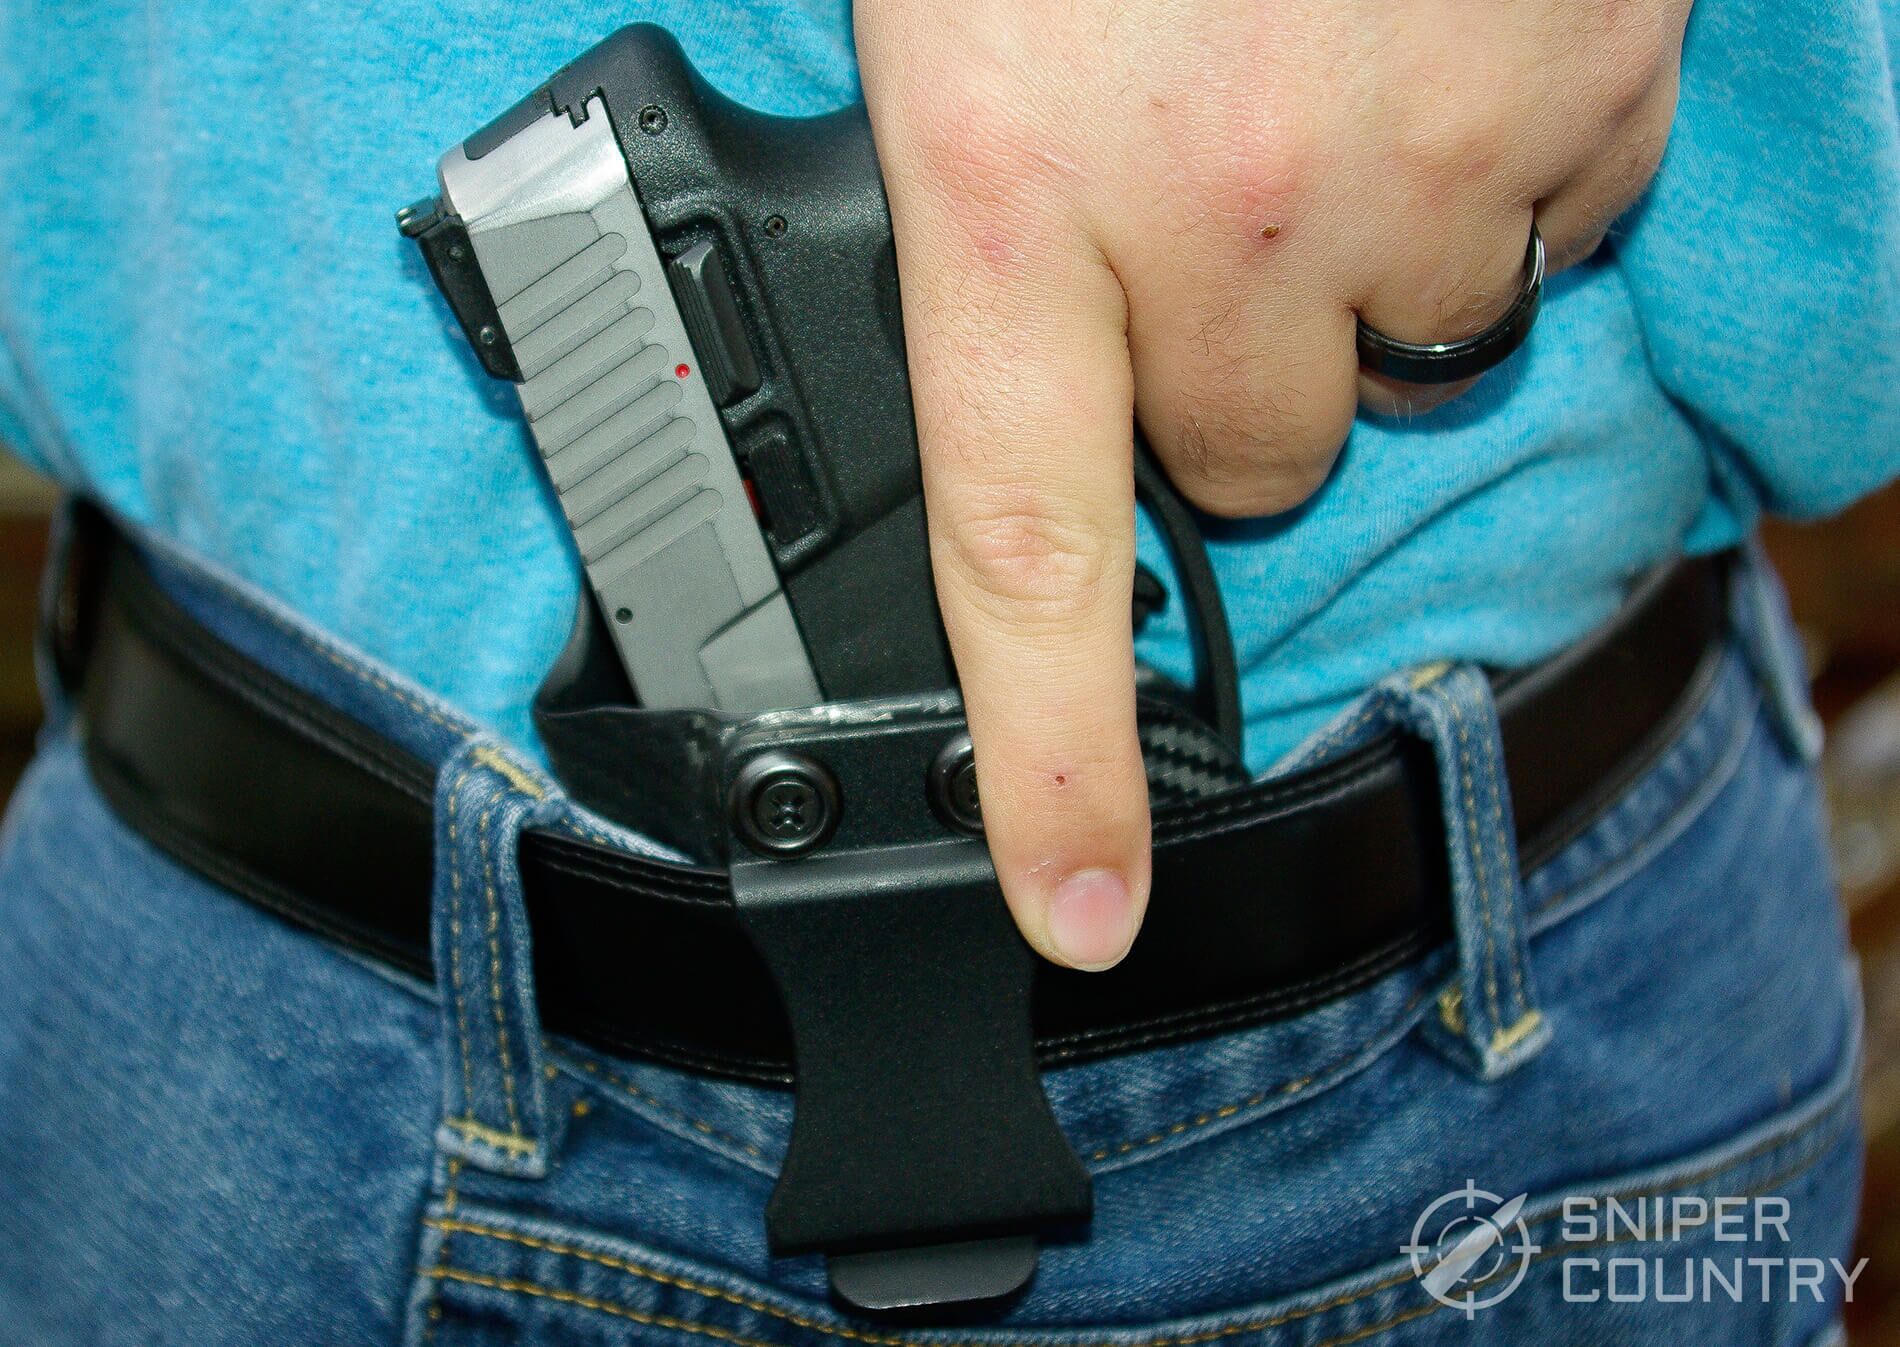 Holster Buyers Guide: Best Concealed Carry Holsters